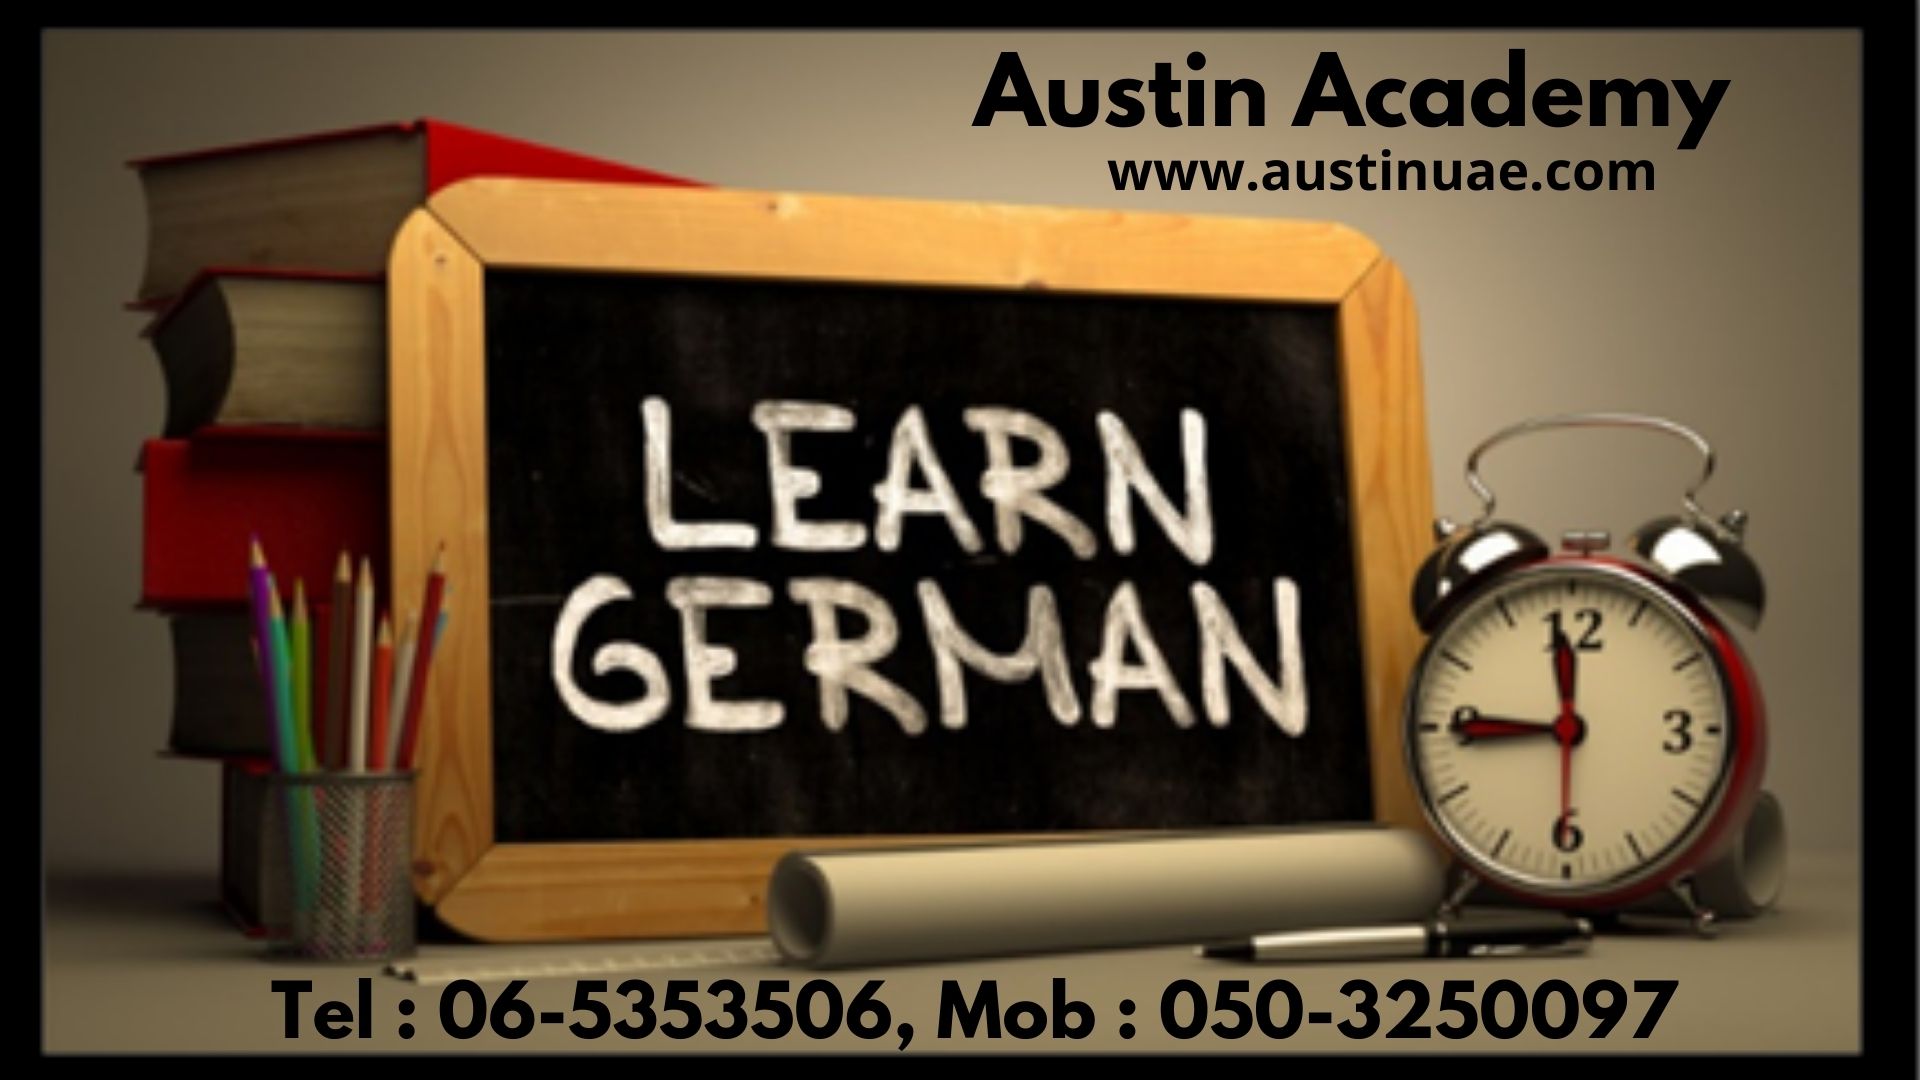 German Language Classes In Sharjah With Best Offer Call 0588197415